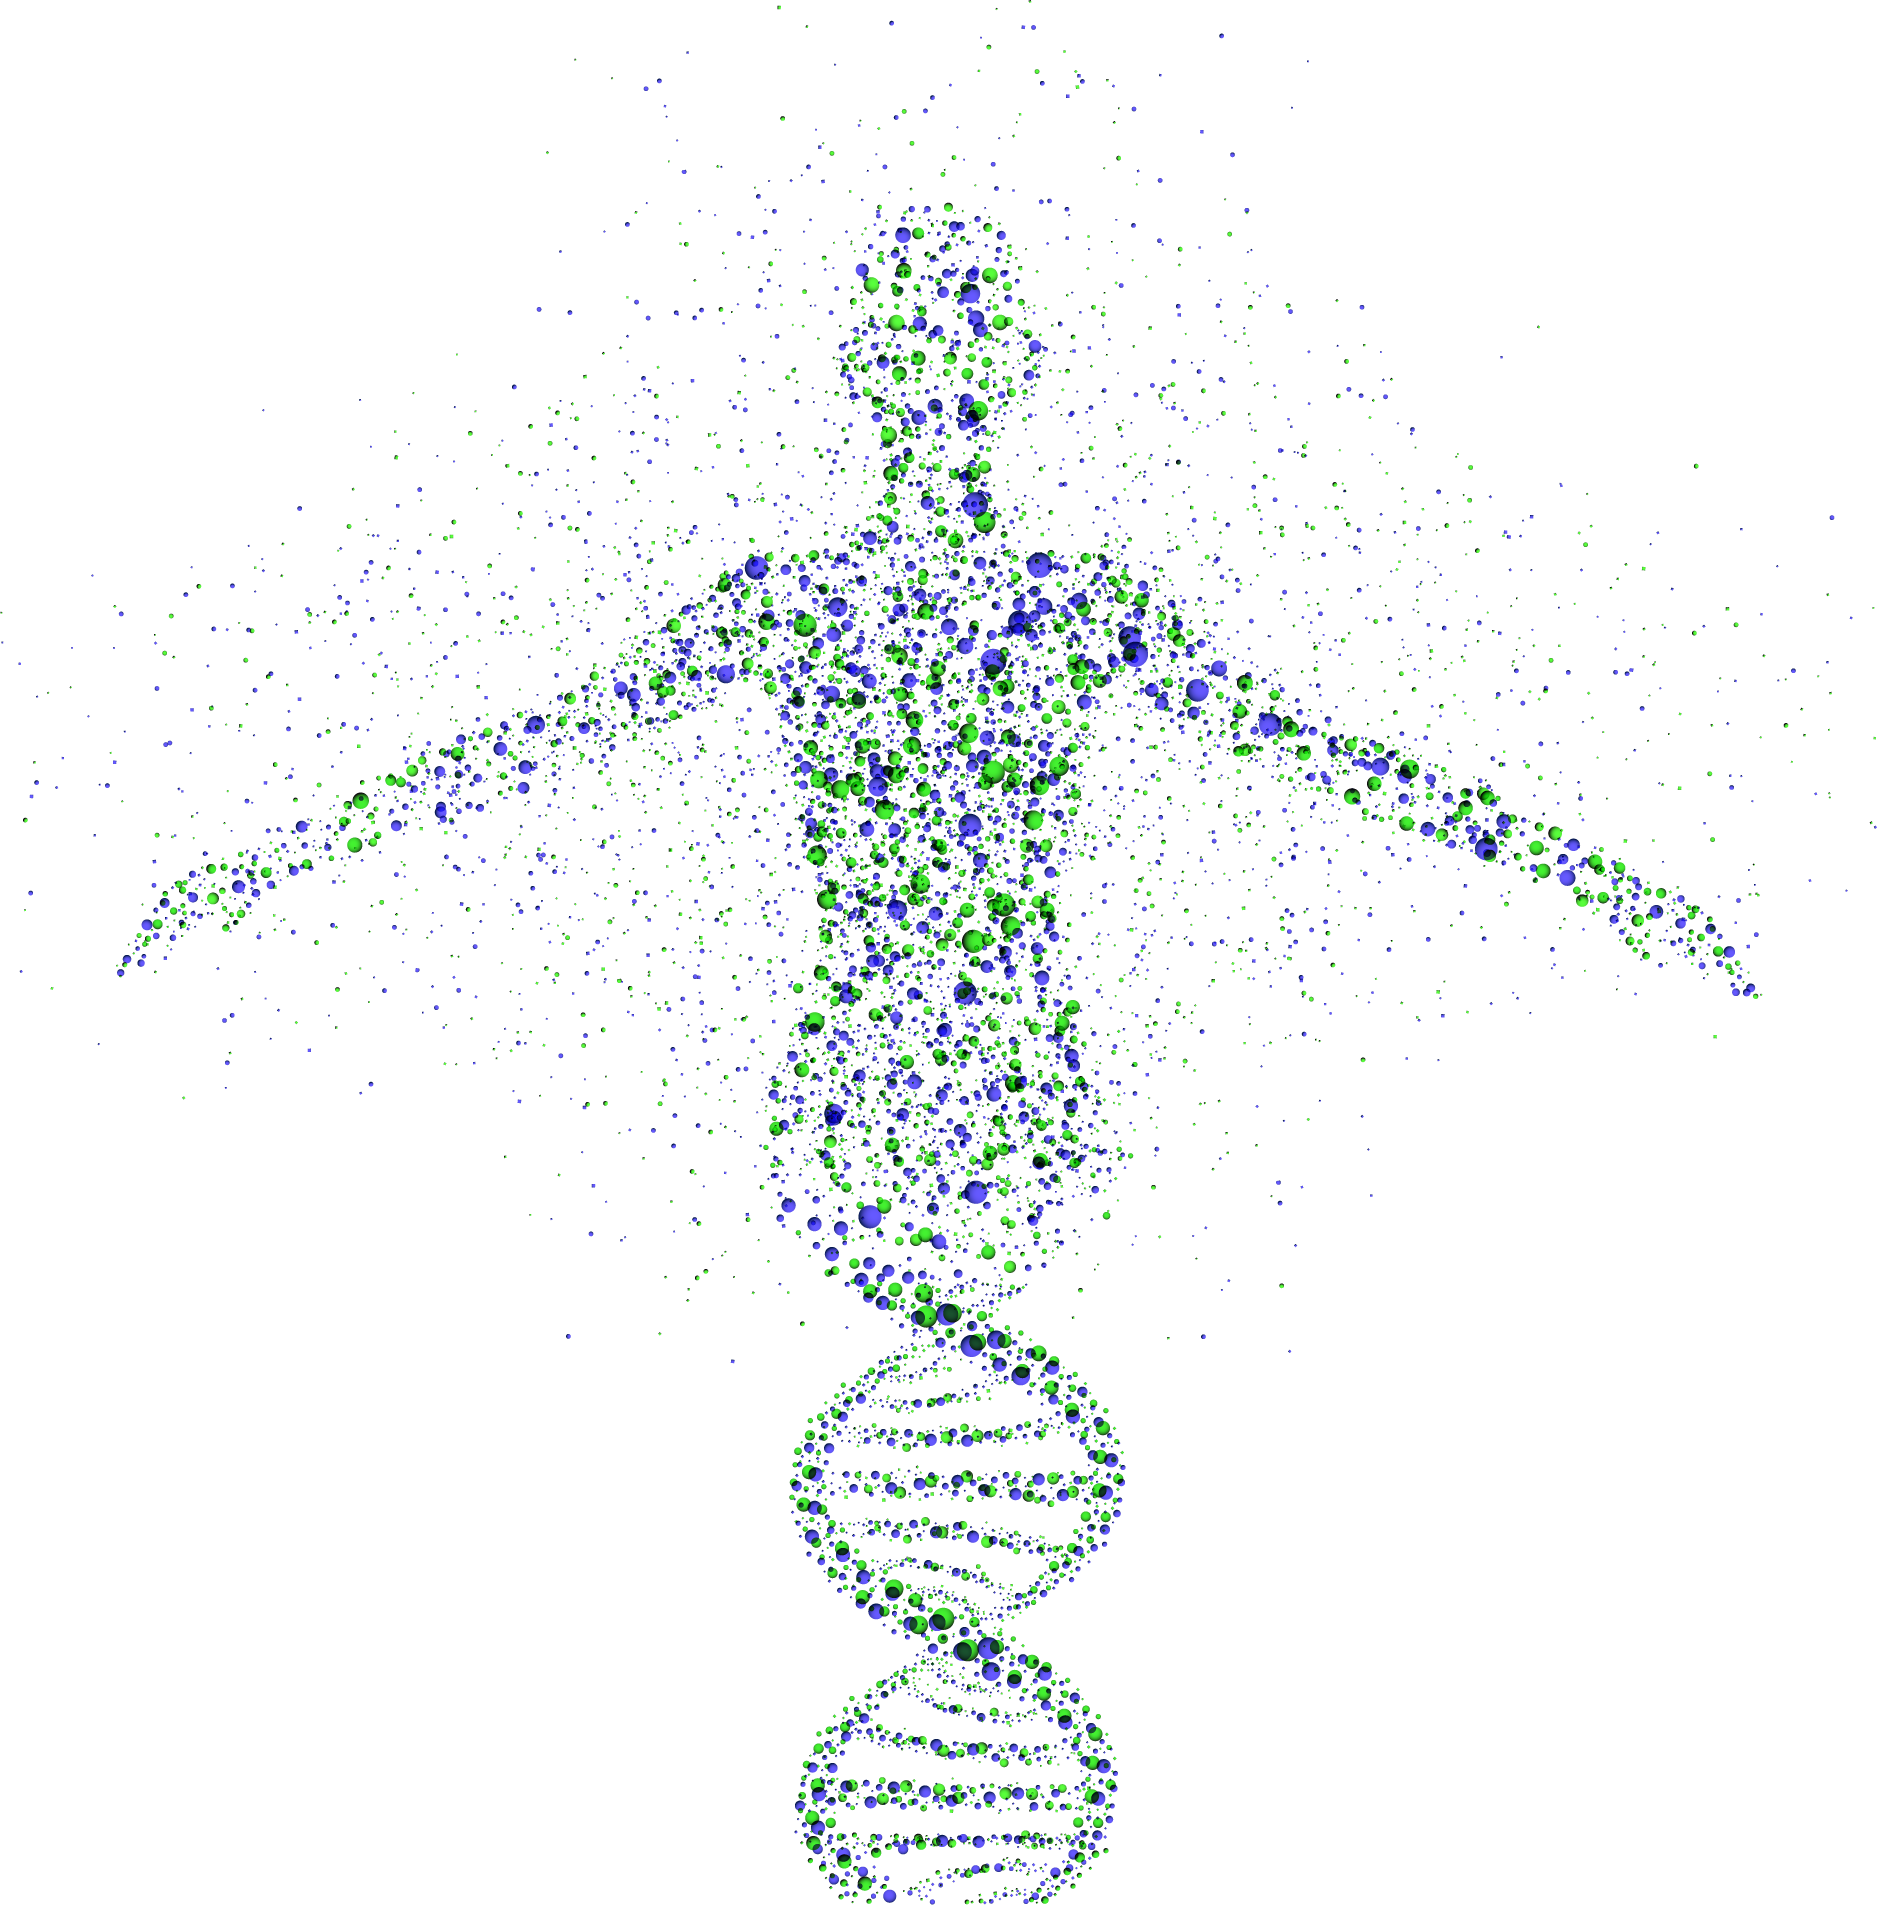 DNA in the shape of a human